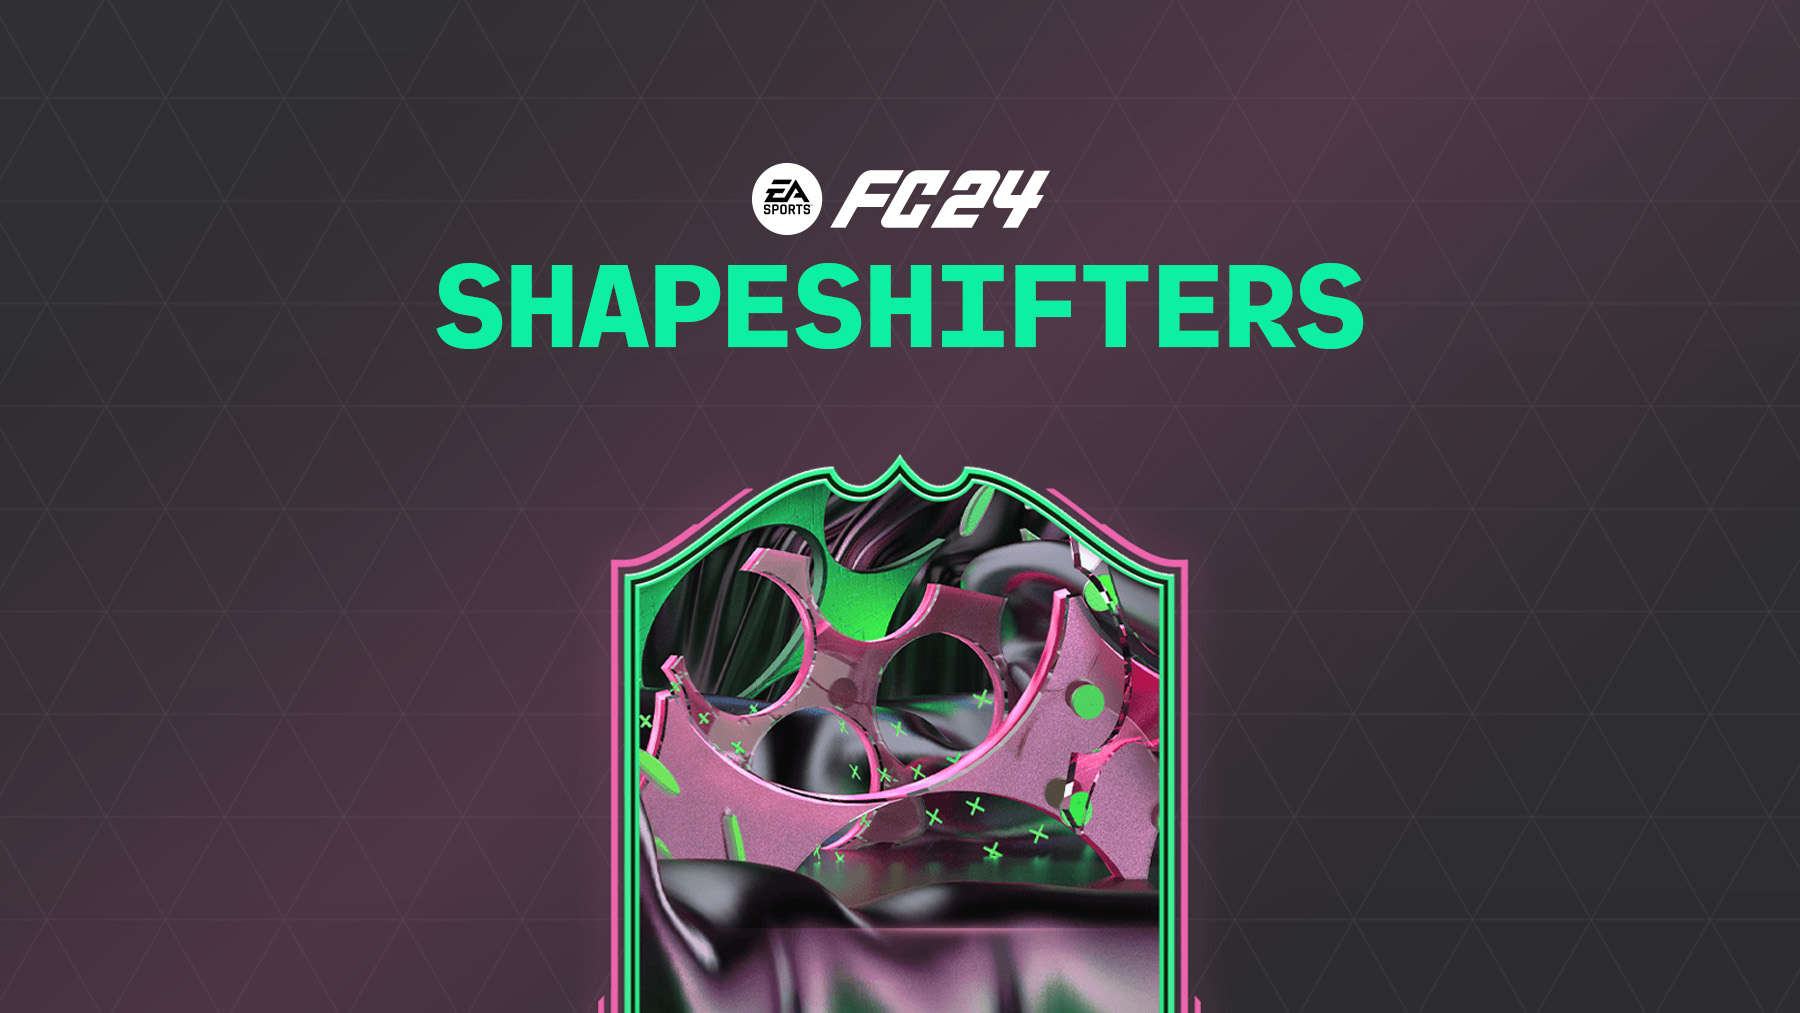 EA Sports FC 24 Shapeshifters event is predicted to be available in June 2024.